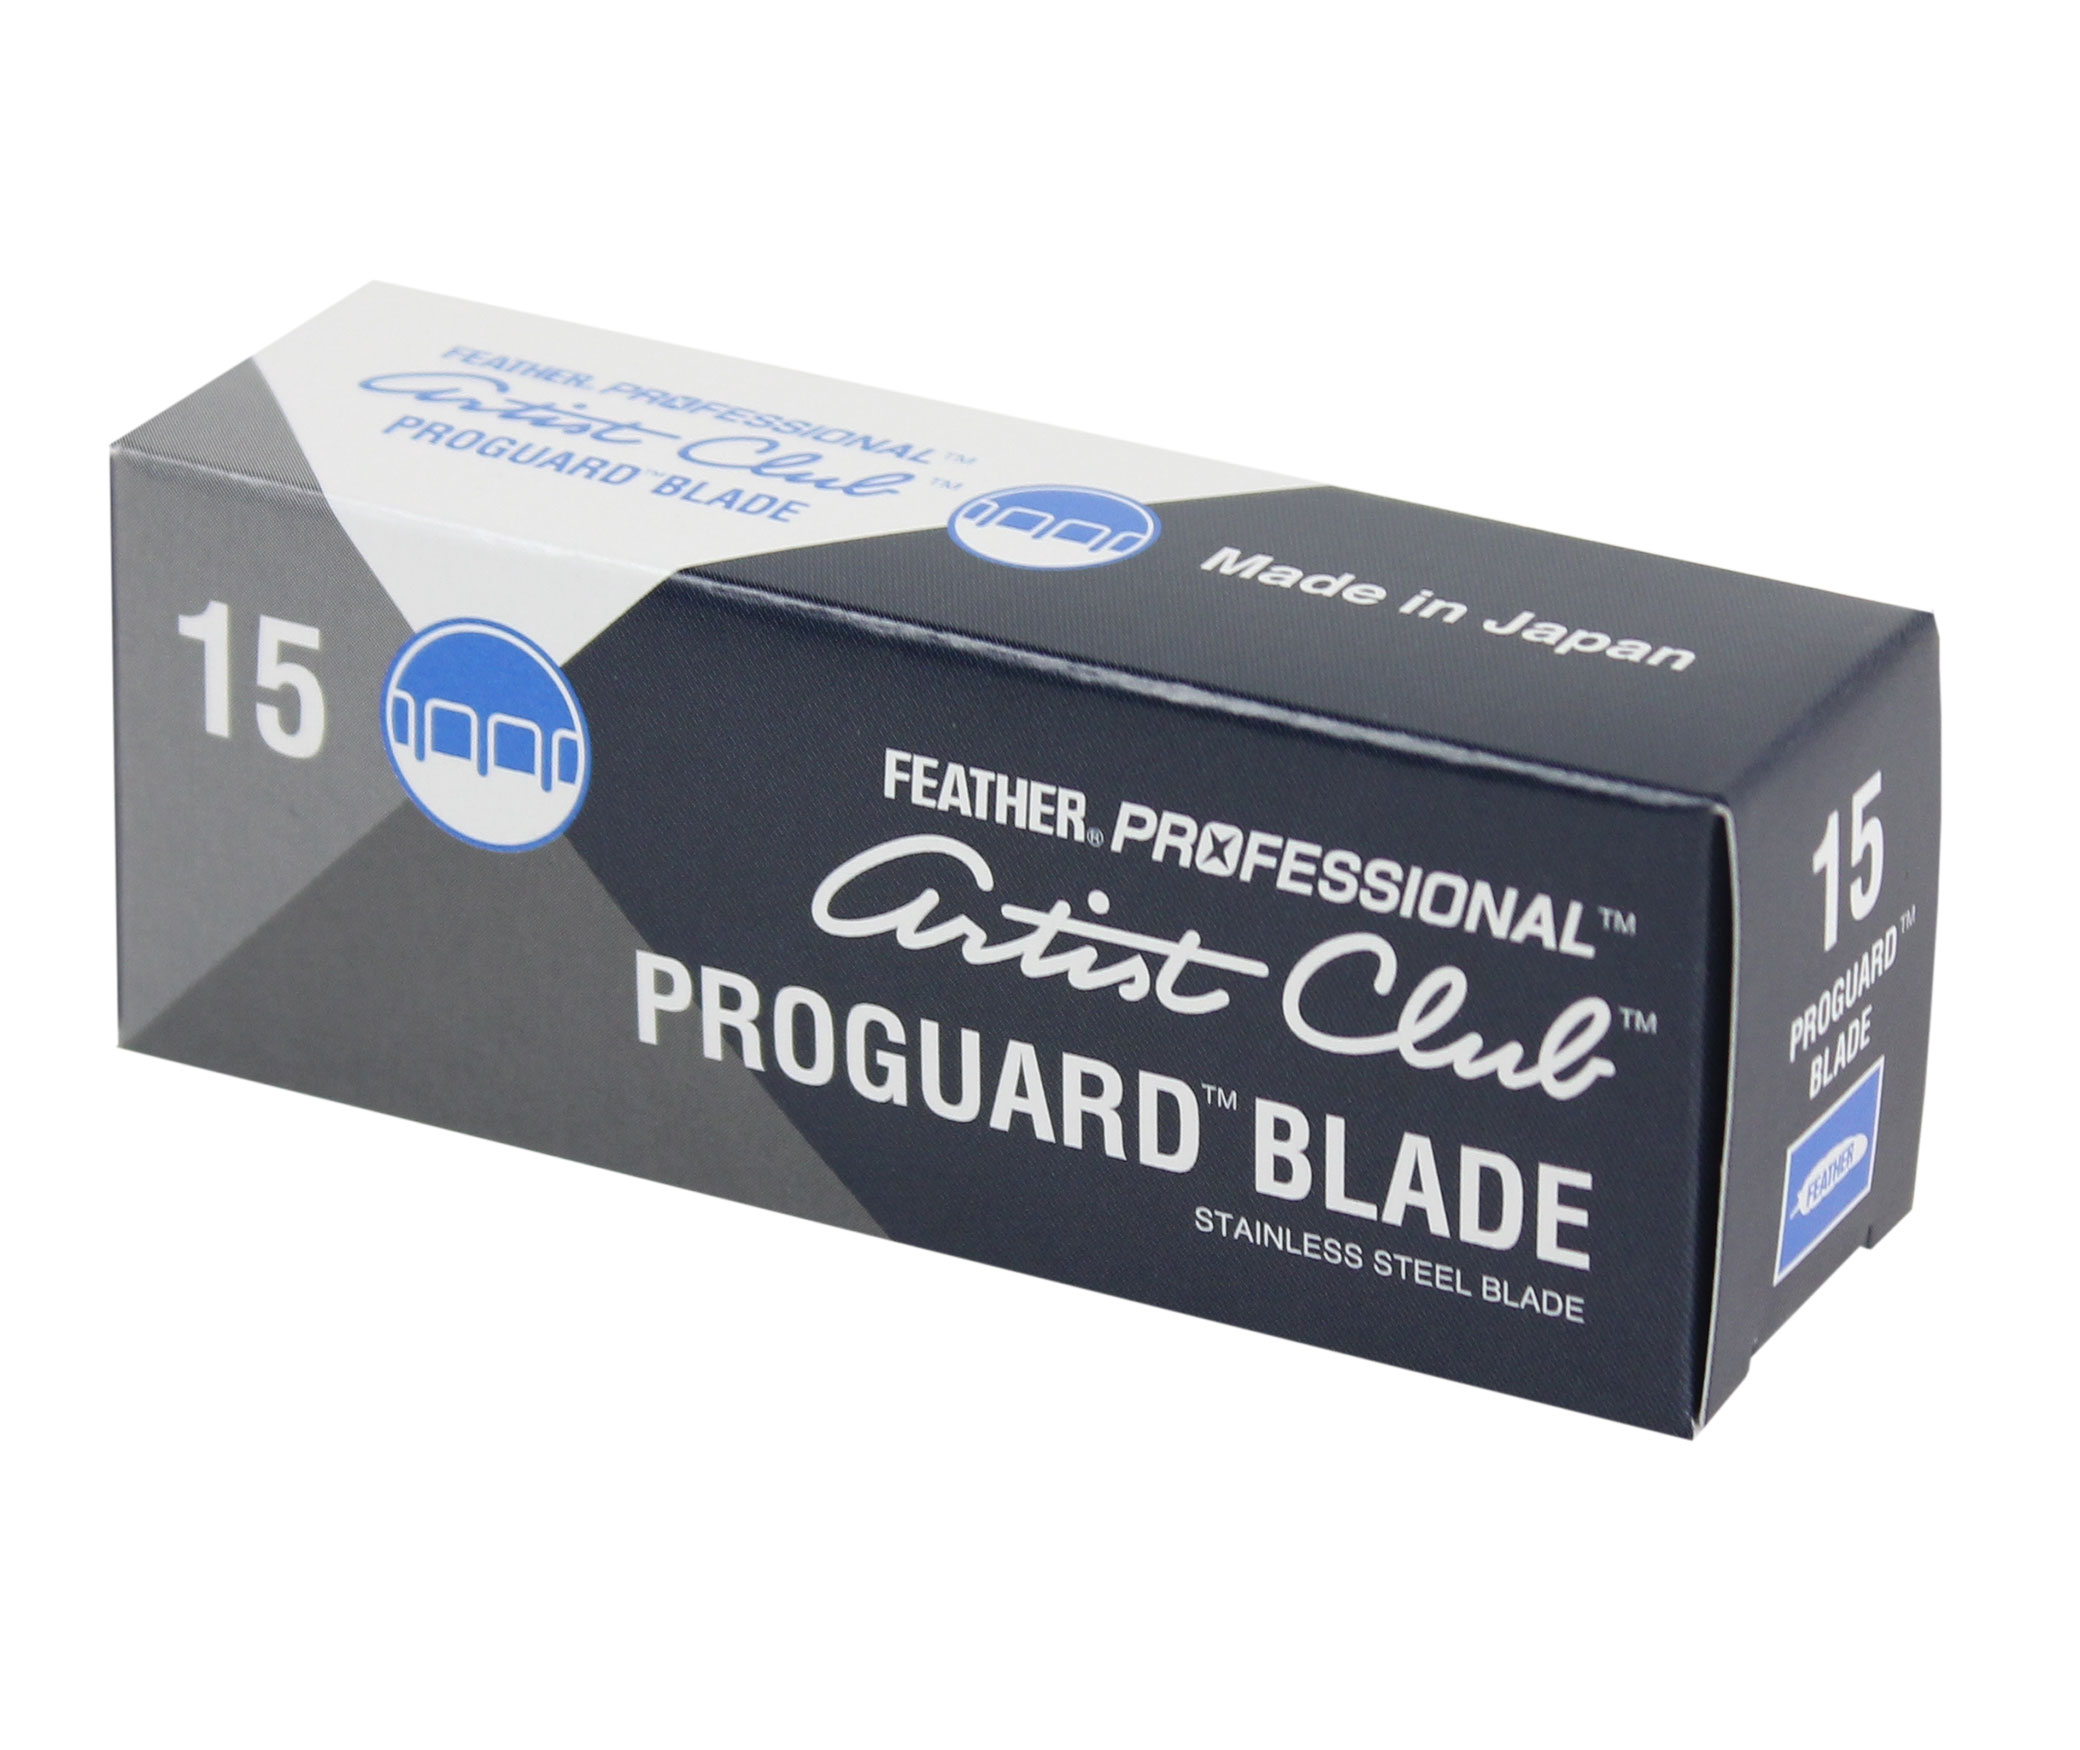 Feather Artist Club ProGuard Blade package